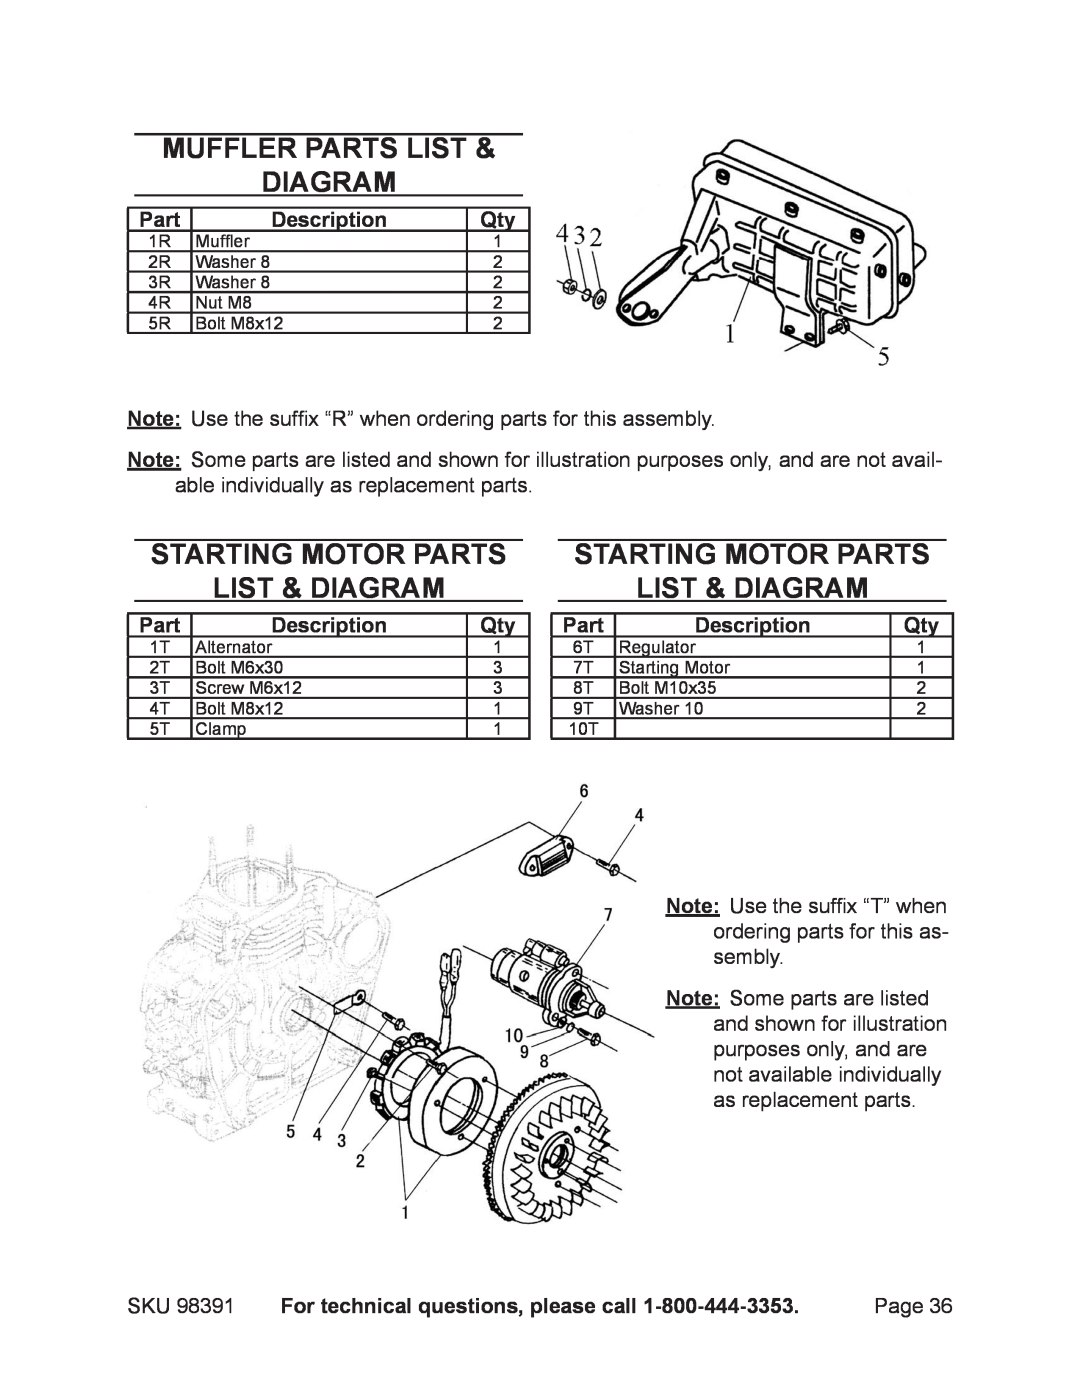 Chicago Electric 98391 manual Muffler PARTS LIST diagram, Starting motor PARTS LIST & diagram, Part, Description 